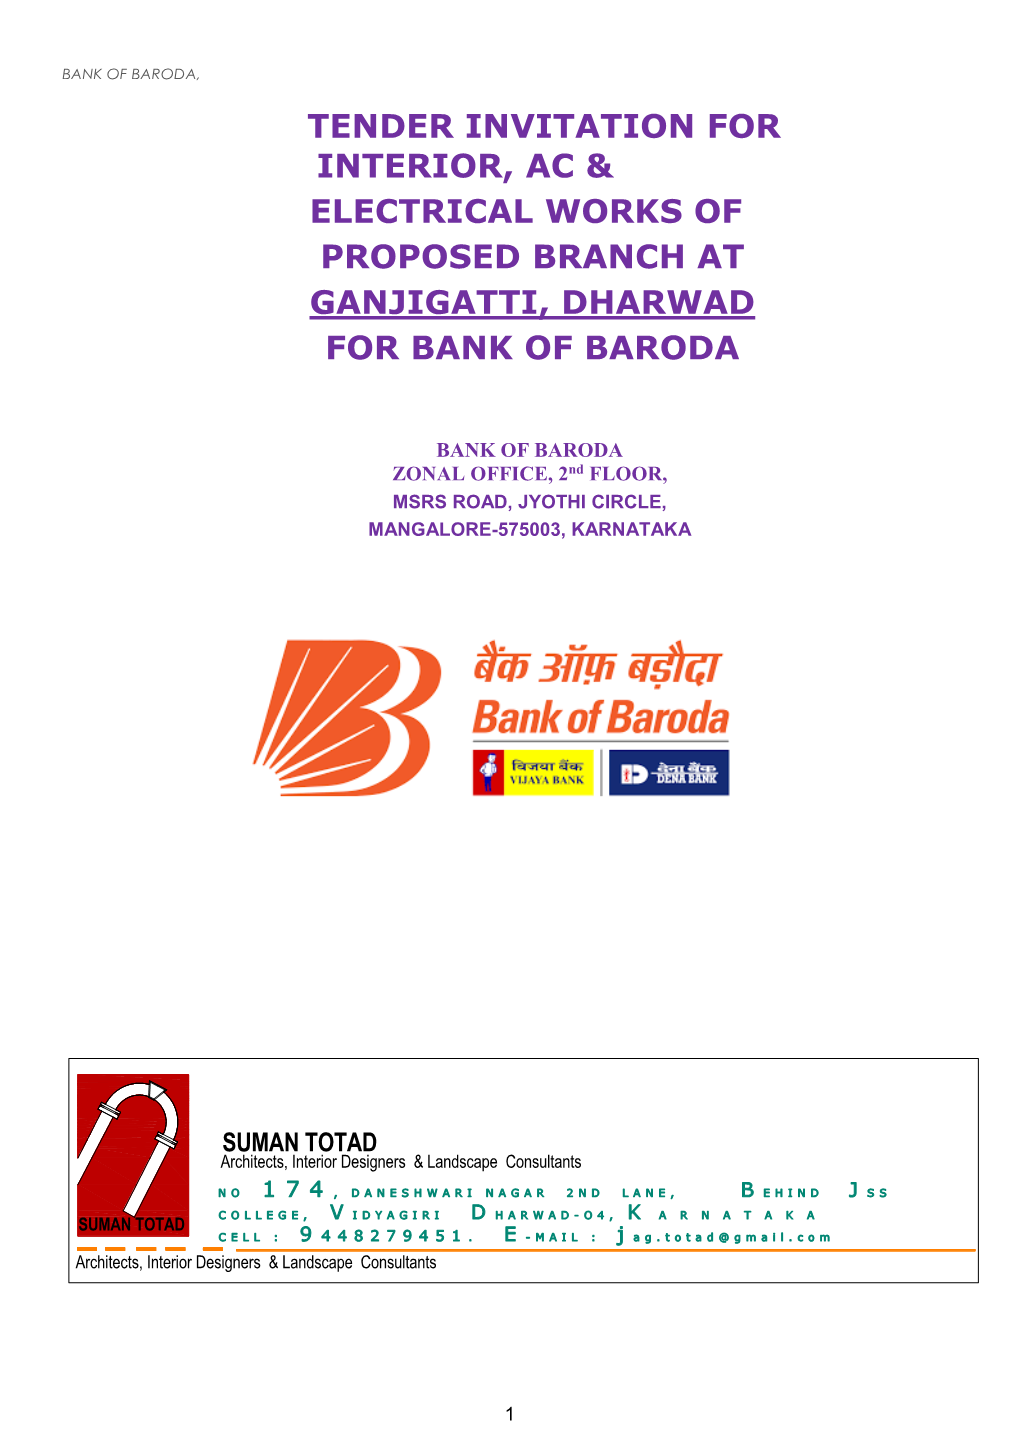 Tender Invitation for Interior, Ac & Electrical Works of Proposed Branch at Ganjigatti, Dharwad for Bank of Baroda